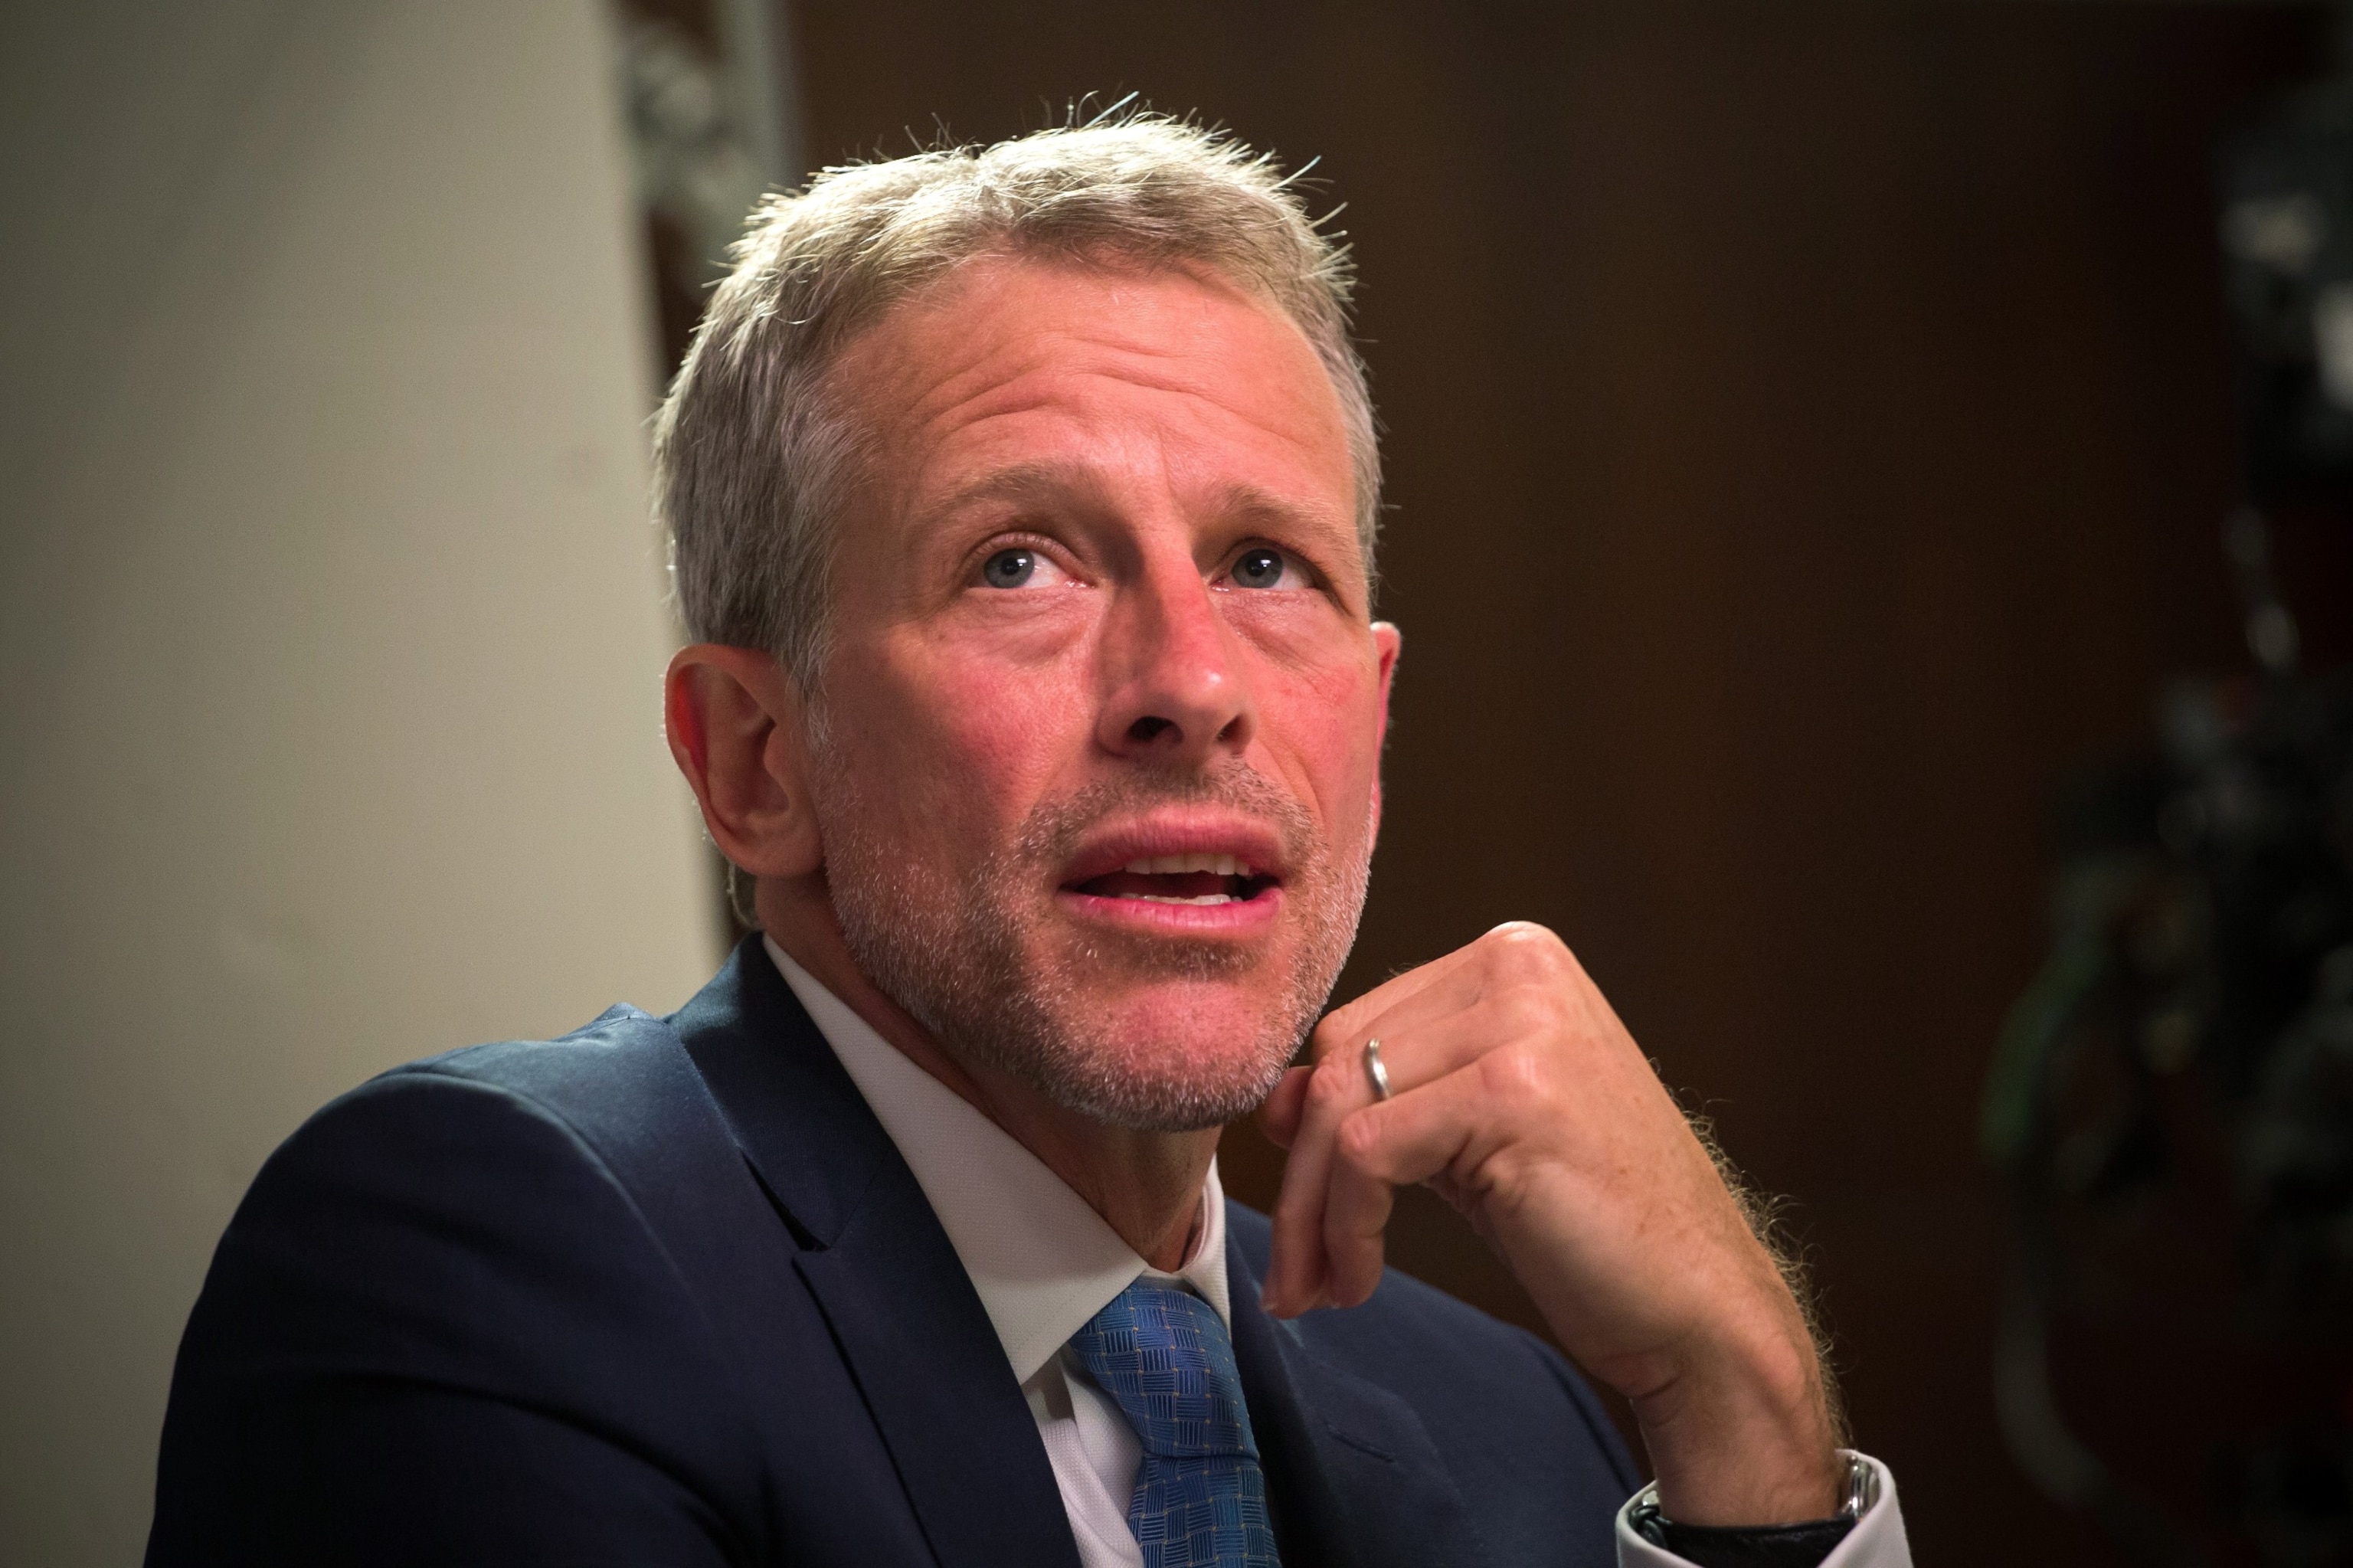 PHOTO: In this Nov. 16, 2015, file photo, Whitney Tilson, portfolio manager for Kase Capital Management, speaks during an interview in New York.